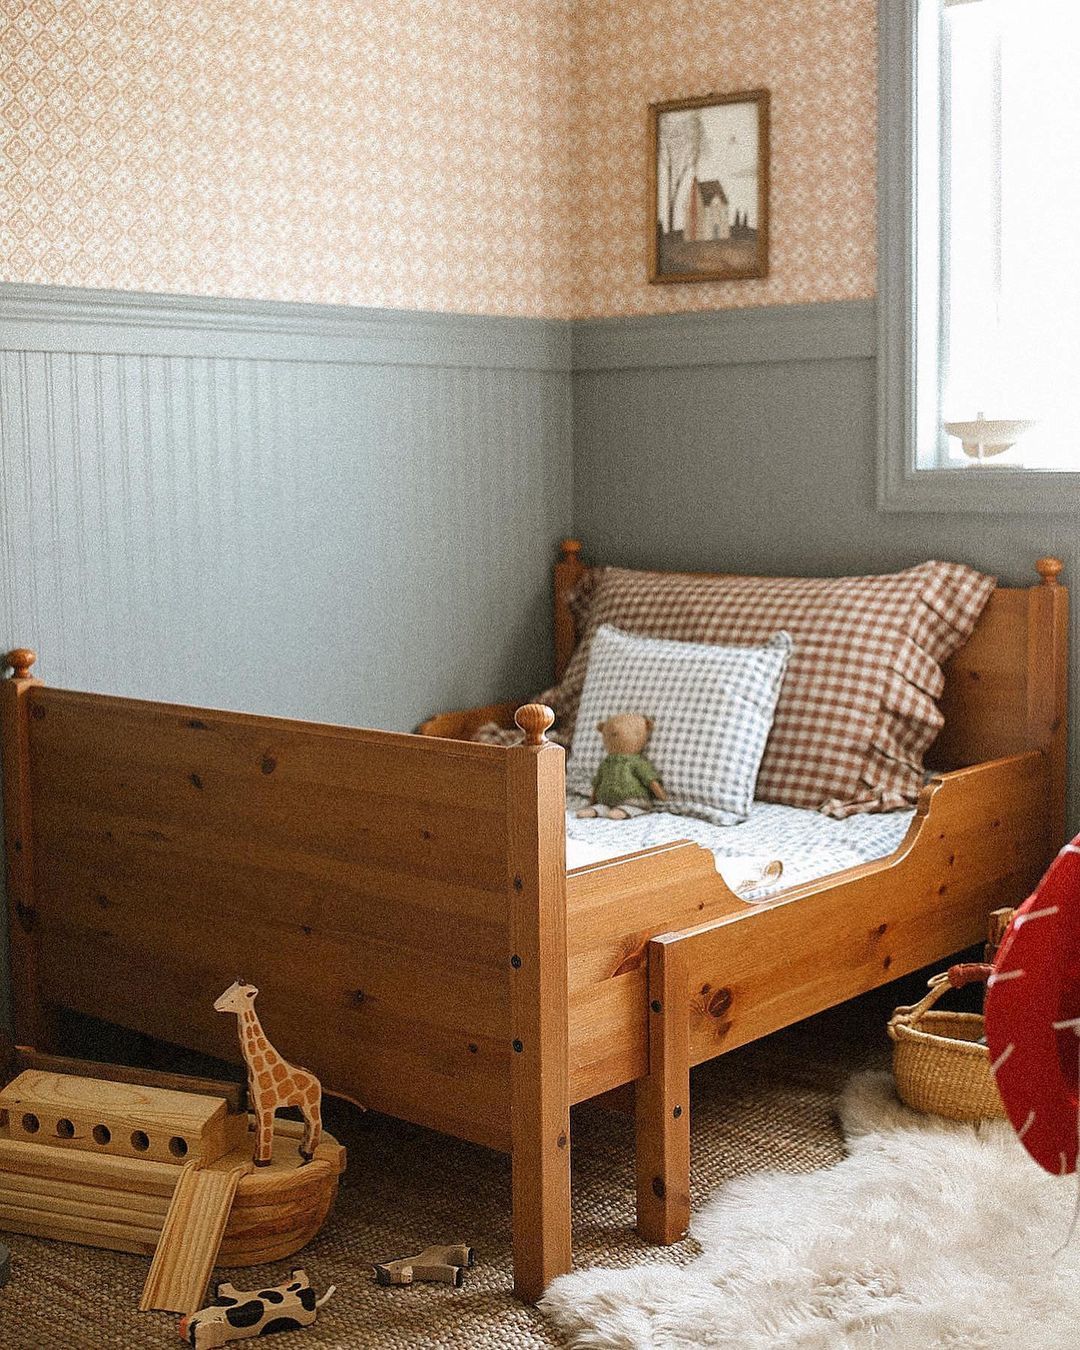 Choosing the Perfect Toddler Bed for
Boys: A Complete Guide